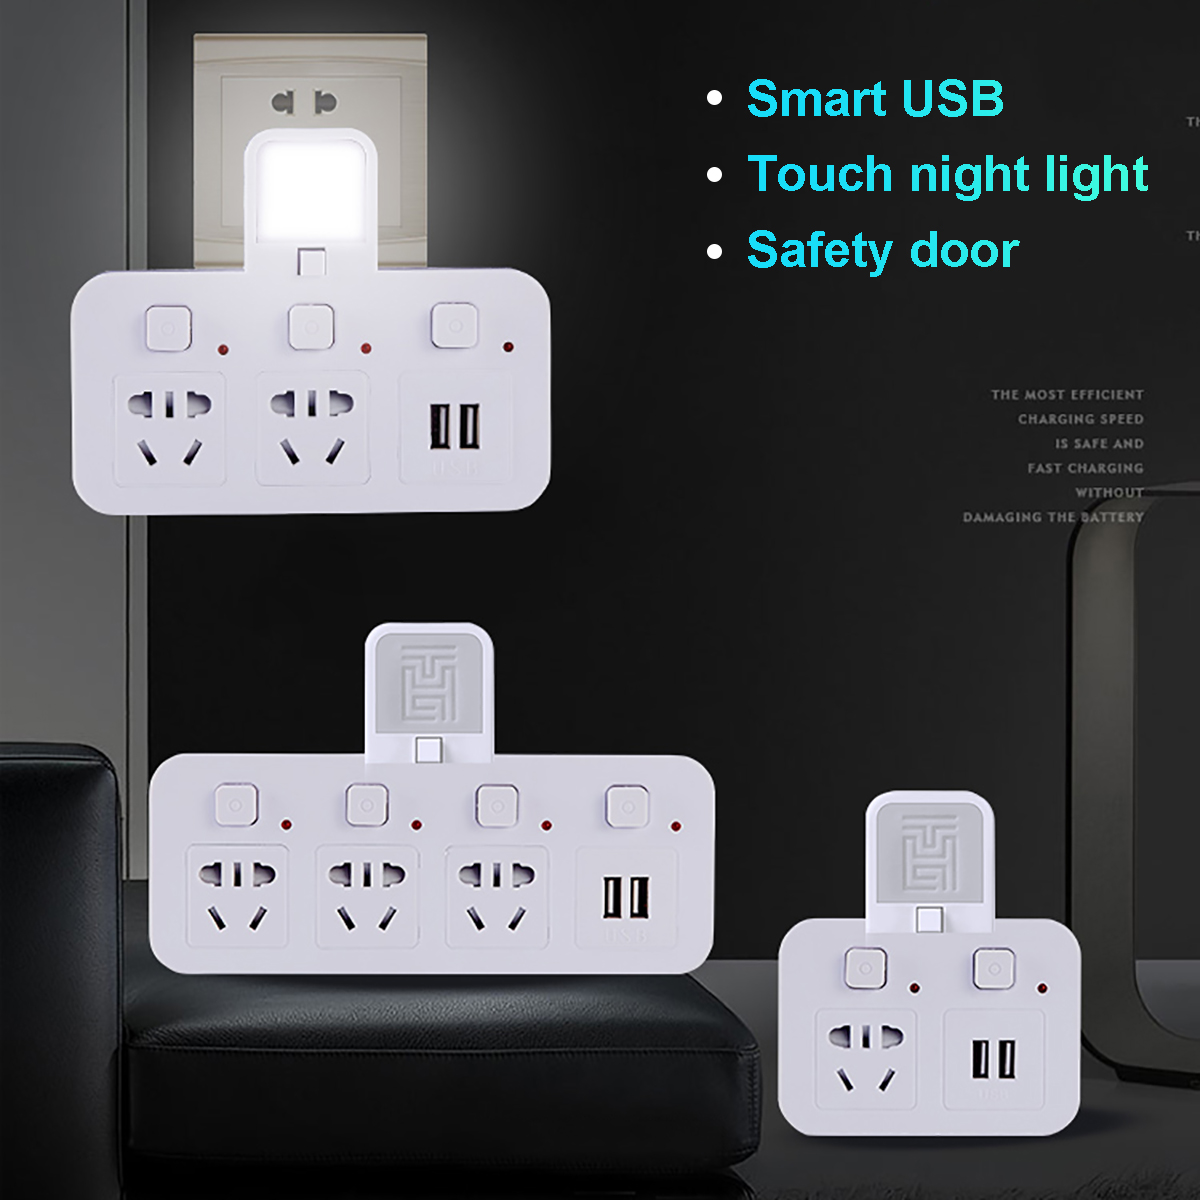 Bakeey-LED-USB-Wall-Charger-with-2-USB-Charging-Ports-Wall-Mount-Charging-Center-Adapter-for-iPhone--1778447-7